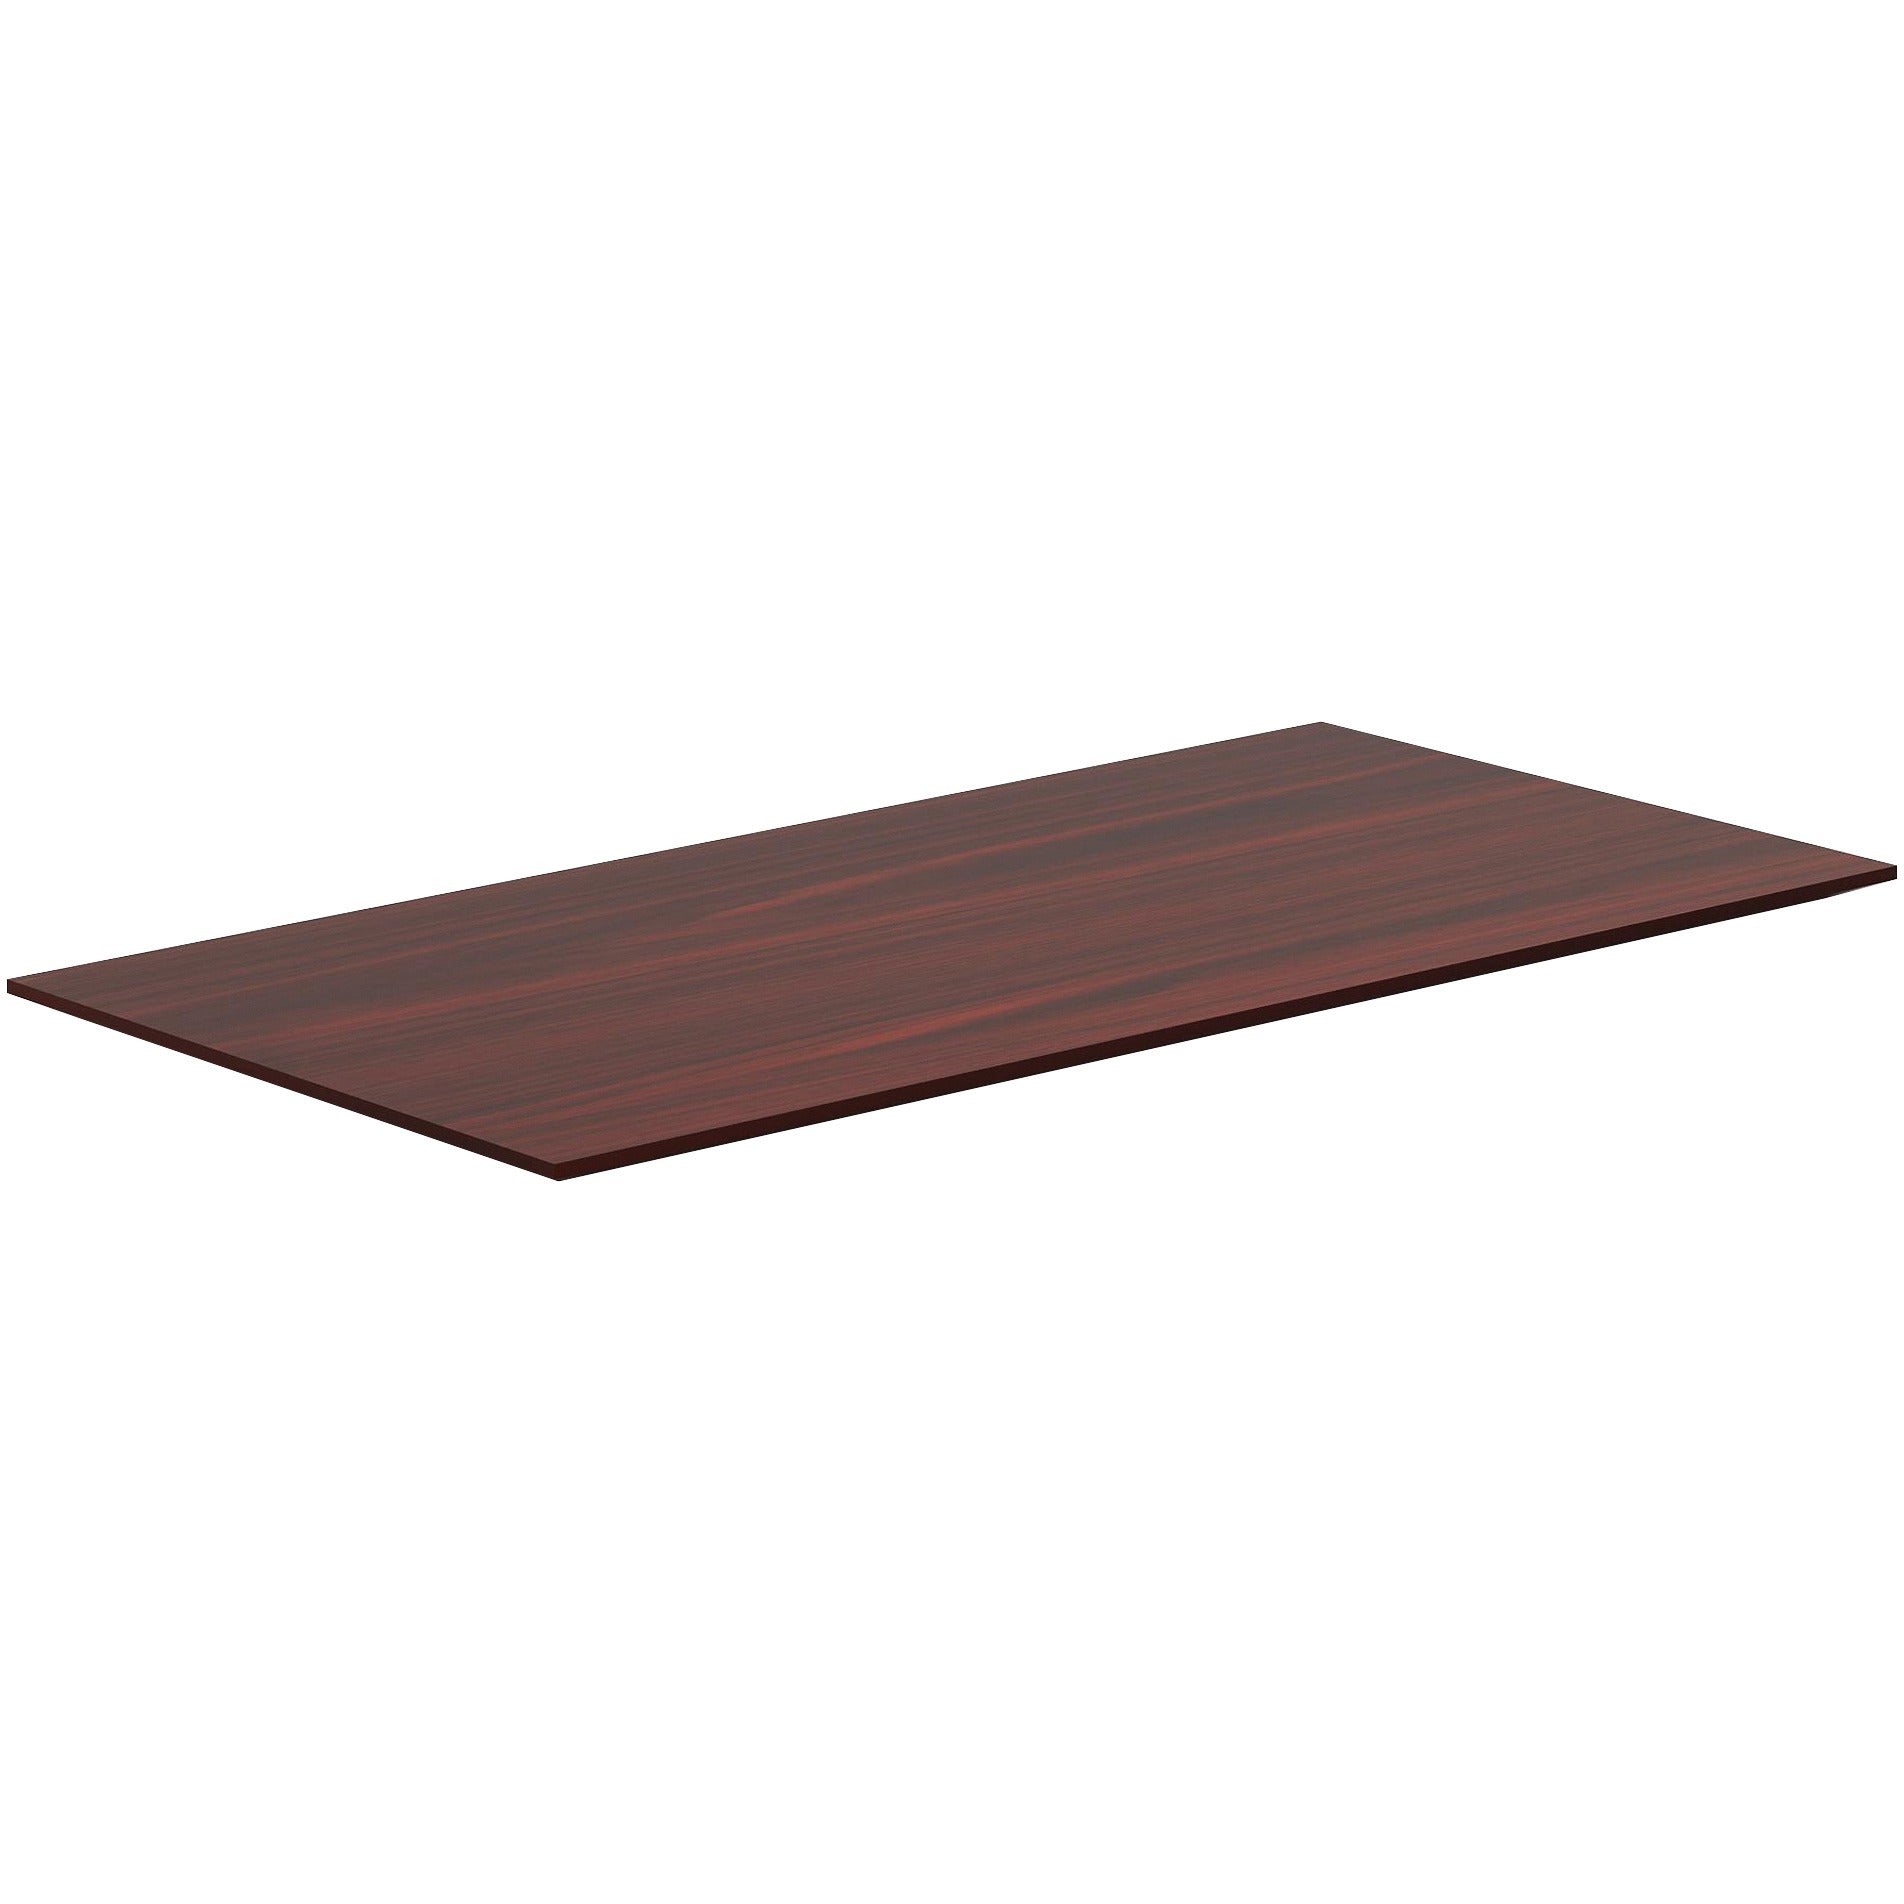 lorell-relevance-series-tabletop-for-table-toprectangle-top-contemporary-style-adjustable-height-x-72-table-top-width-x-30-table-top-depth-x-1-table-top-thickness-assembly-required-mahogany-laminated-1-each_llr34405 - 4